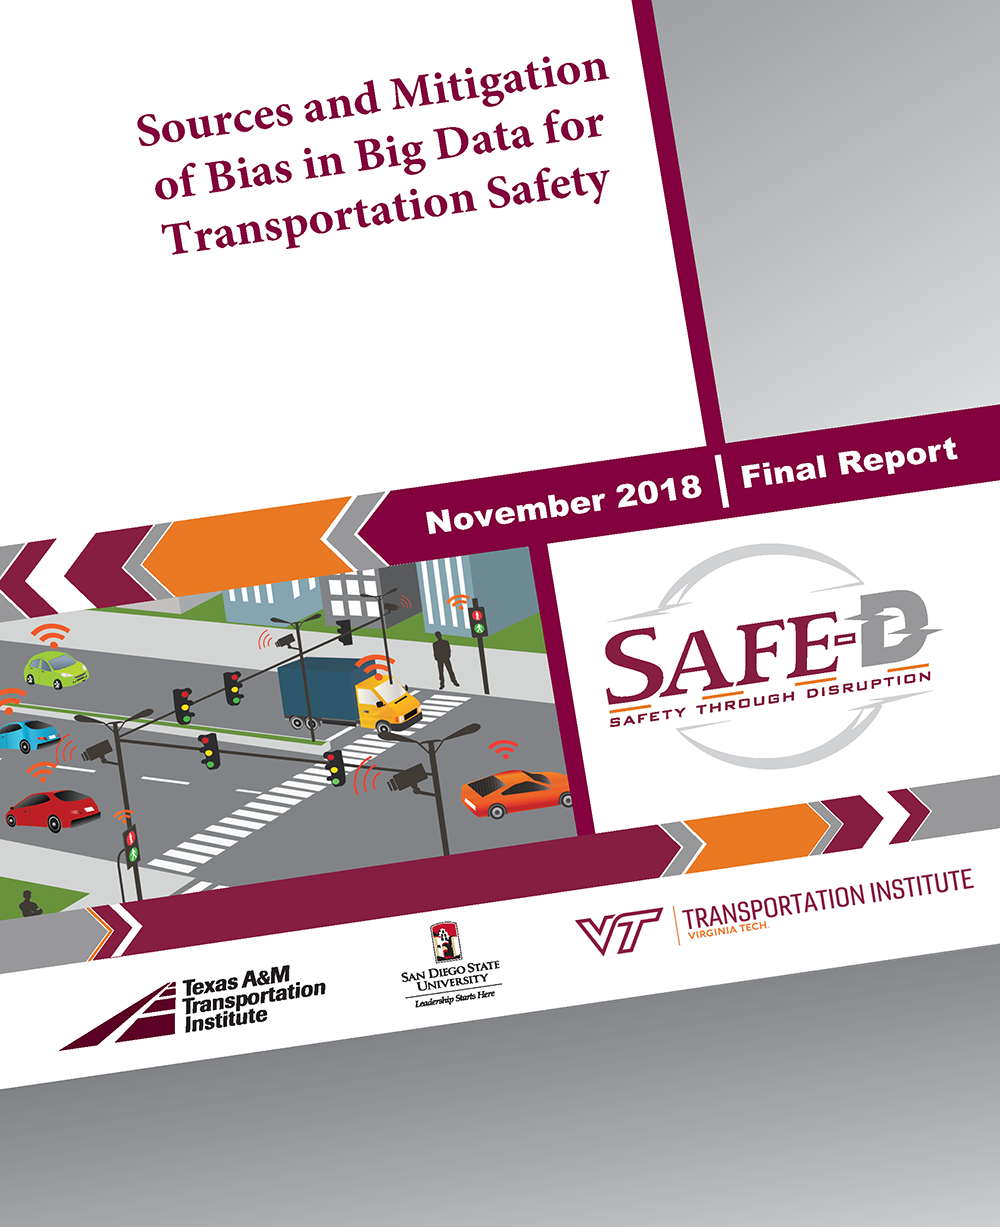 02-026 Final Research Report: Sources and Mitigation of Bias in Big Data for Transportation Safety